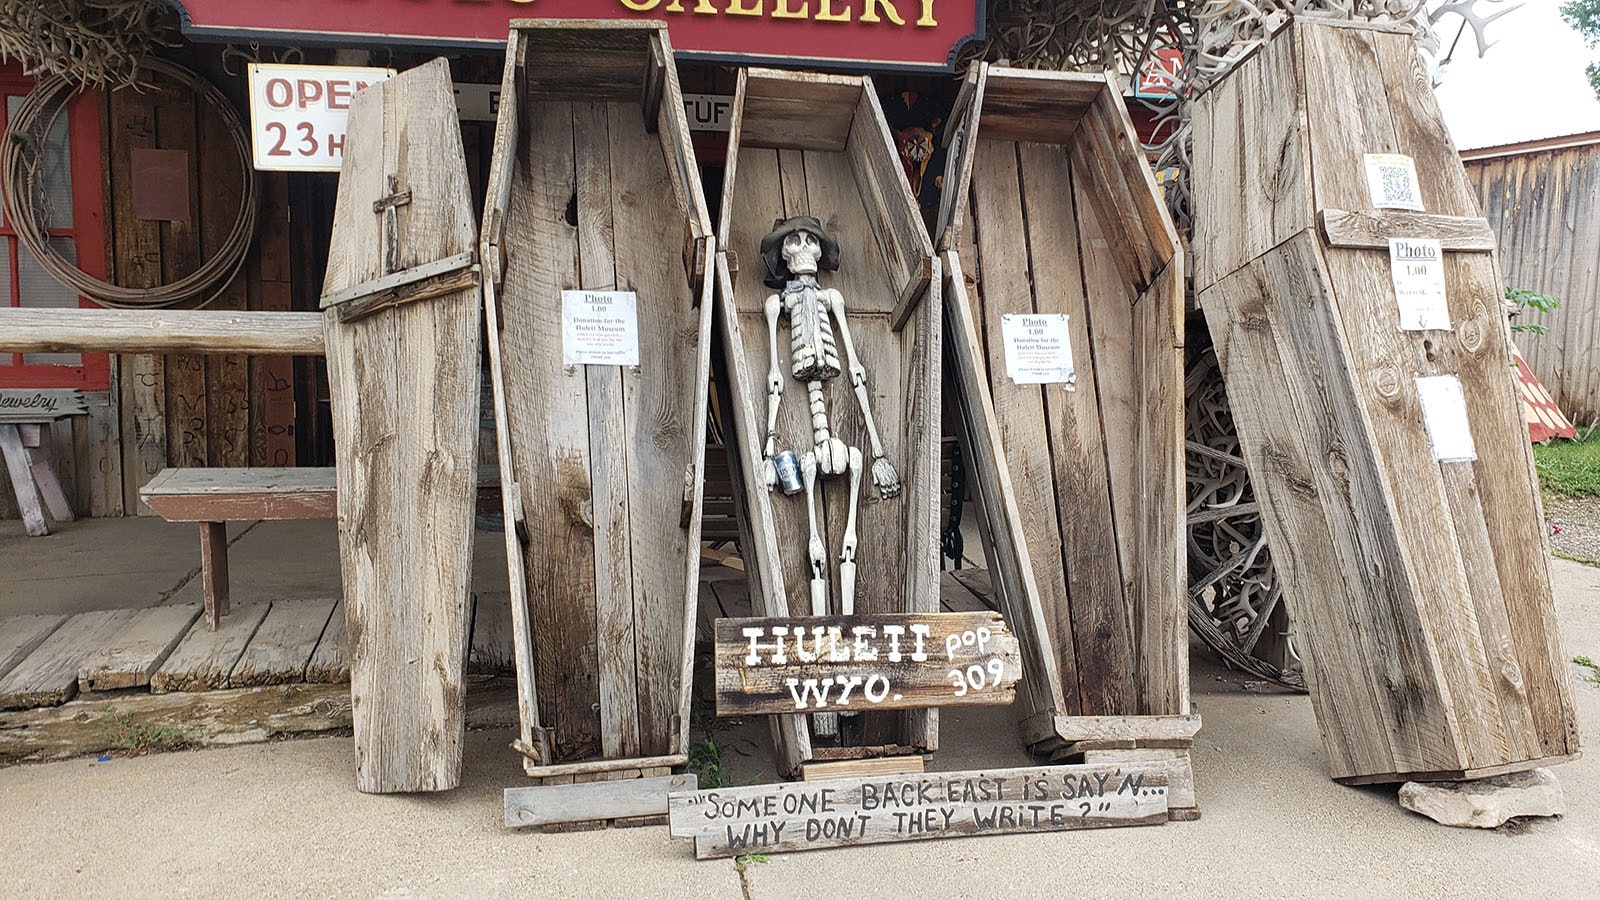 An arrangement of coffins offers tourists a photo opportunity for a donation.